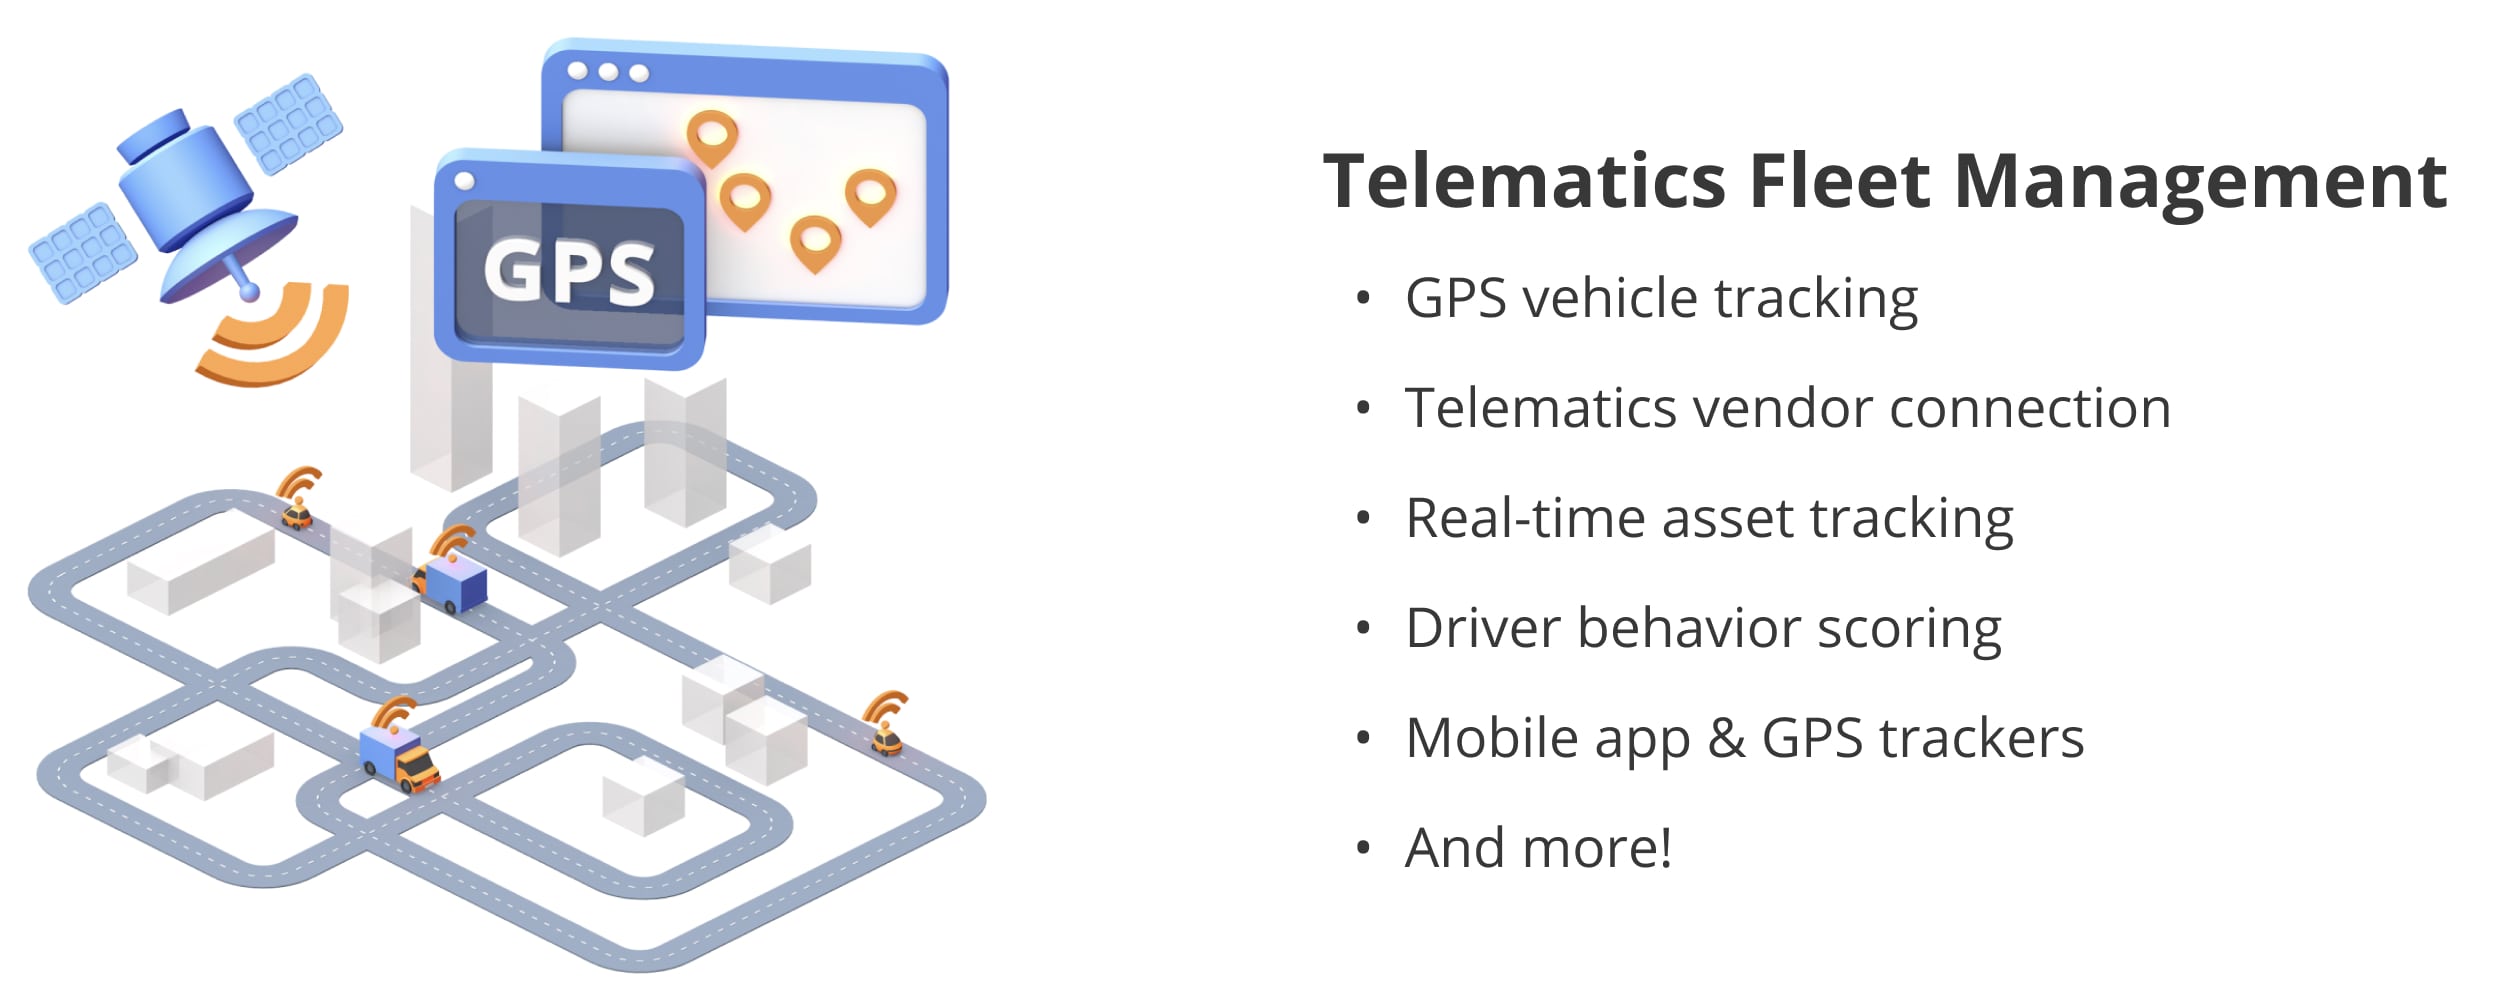 The connection between telematics and vehicle management solutions.